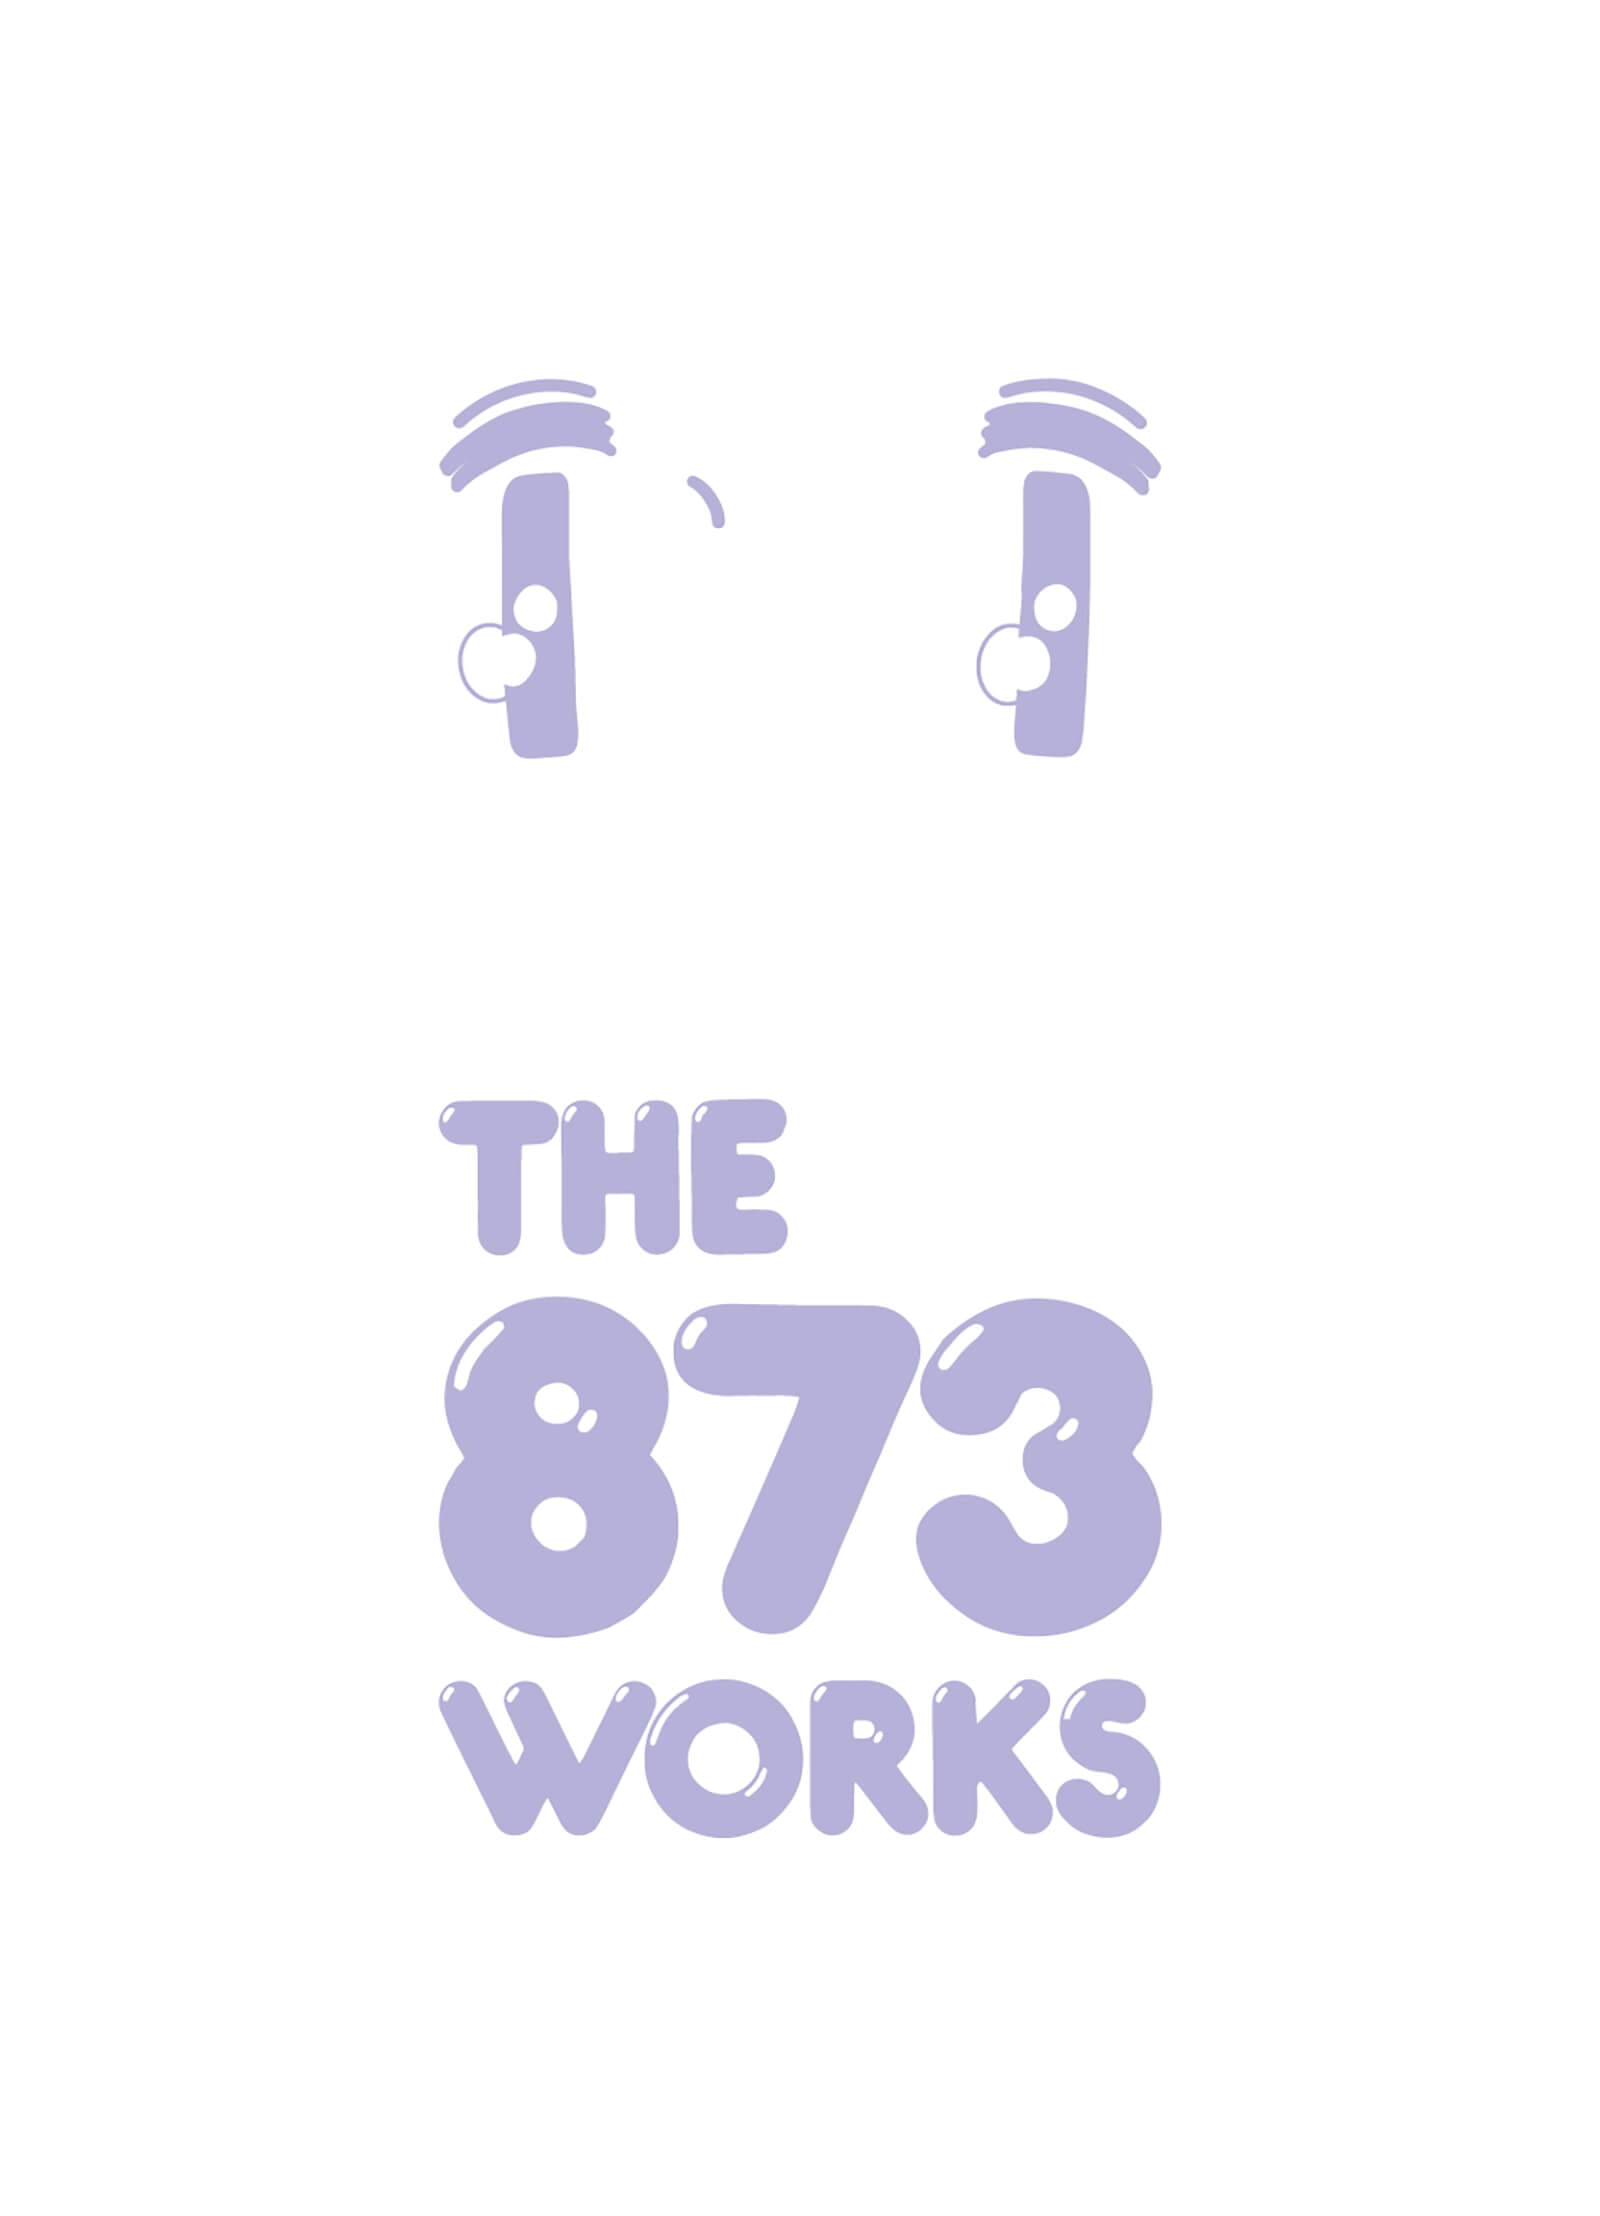 THE 873 WORKS_image1